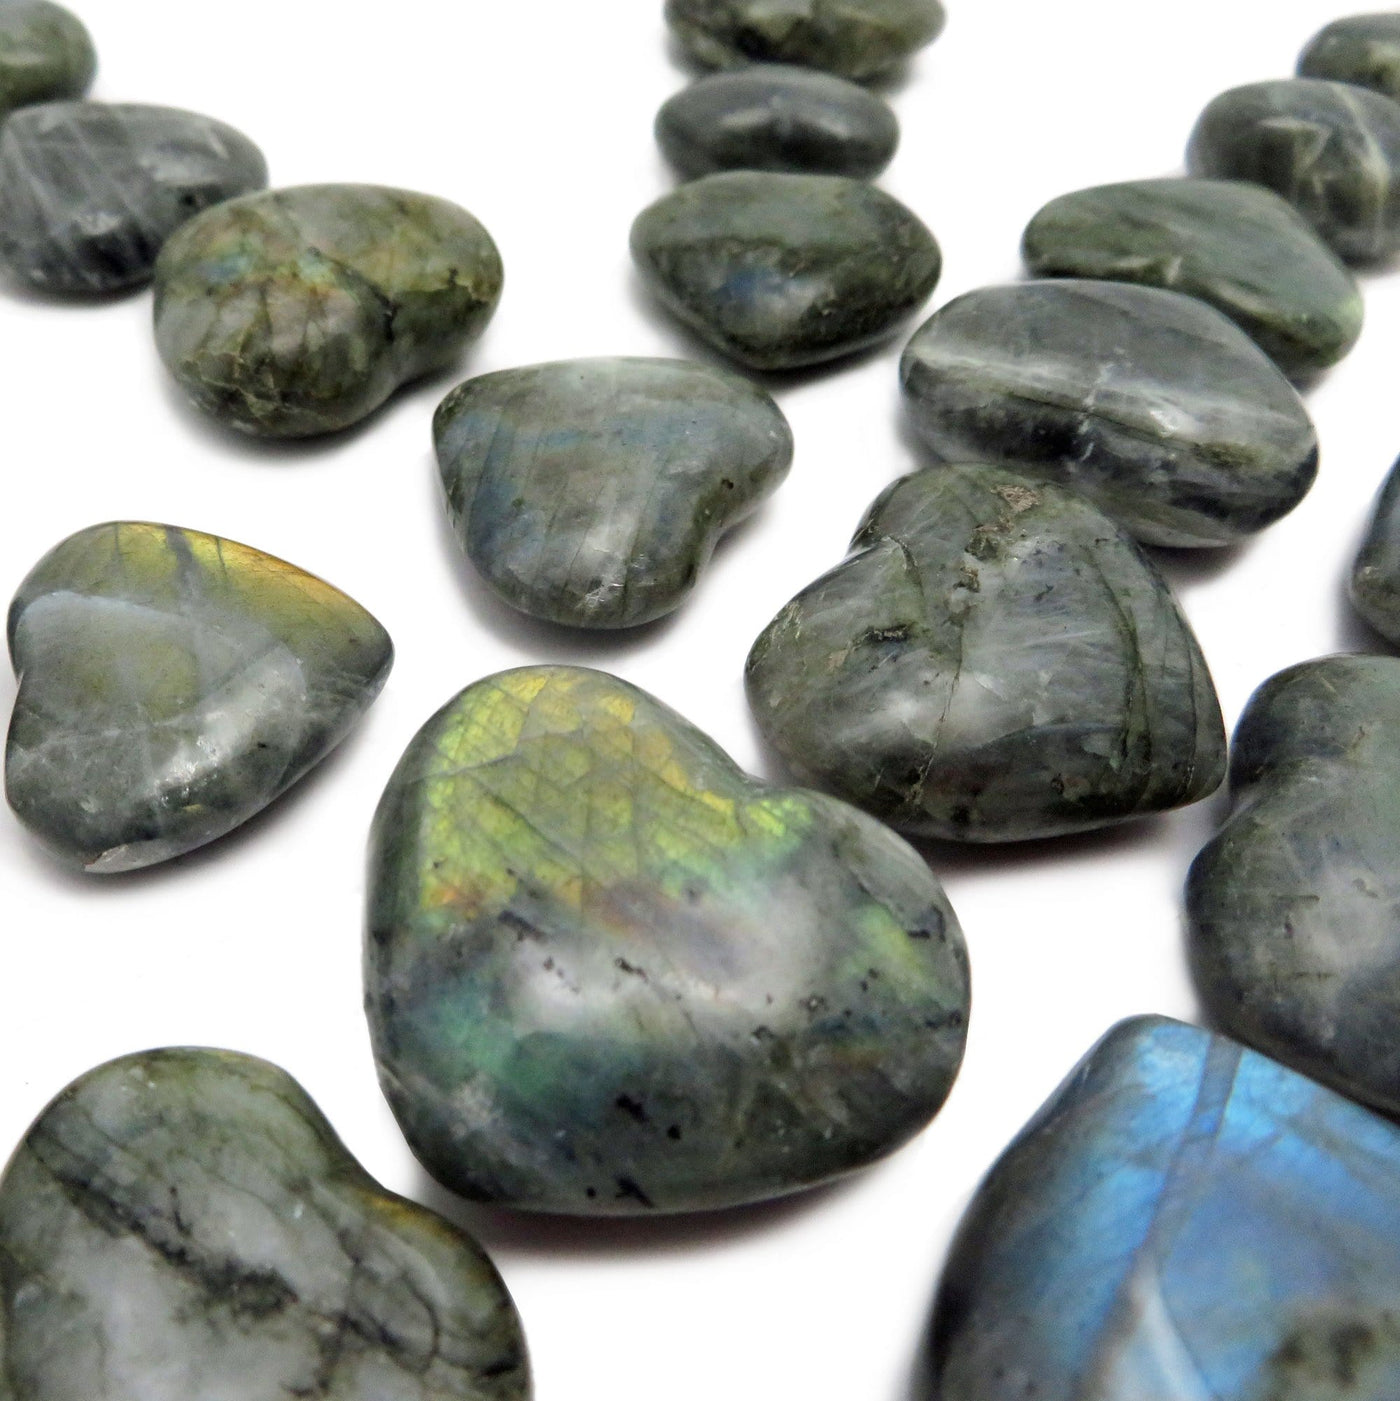 Labradorite Hearts on a white background showing its beautiful glowing colors